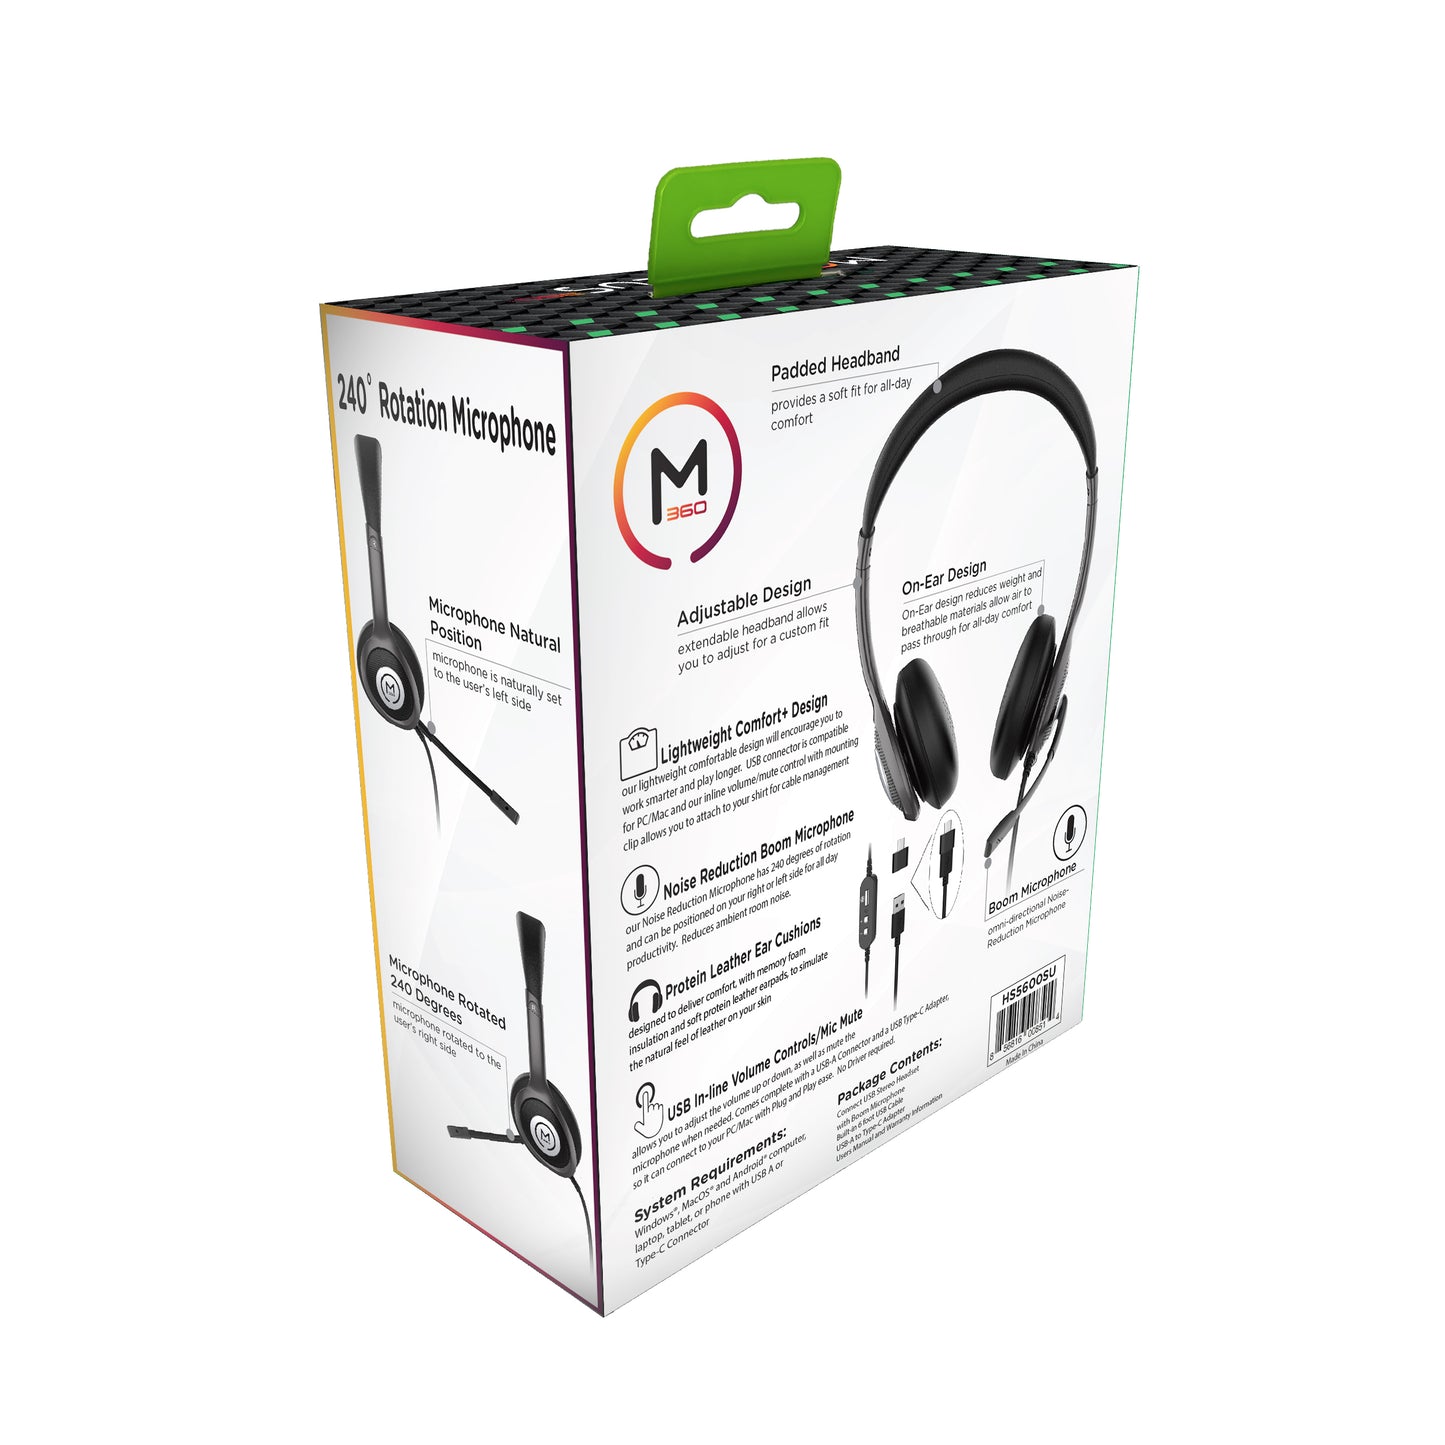 Back of Box Picture of the Connect USB Stereo Headset Retail Package.